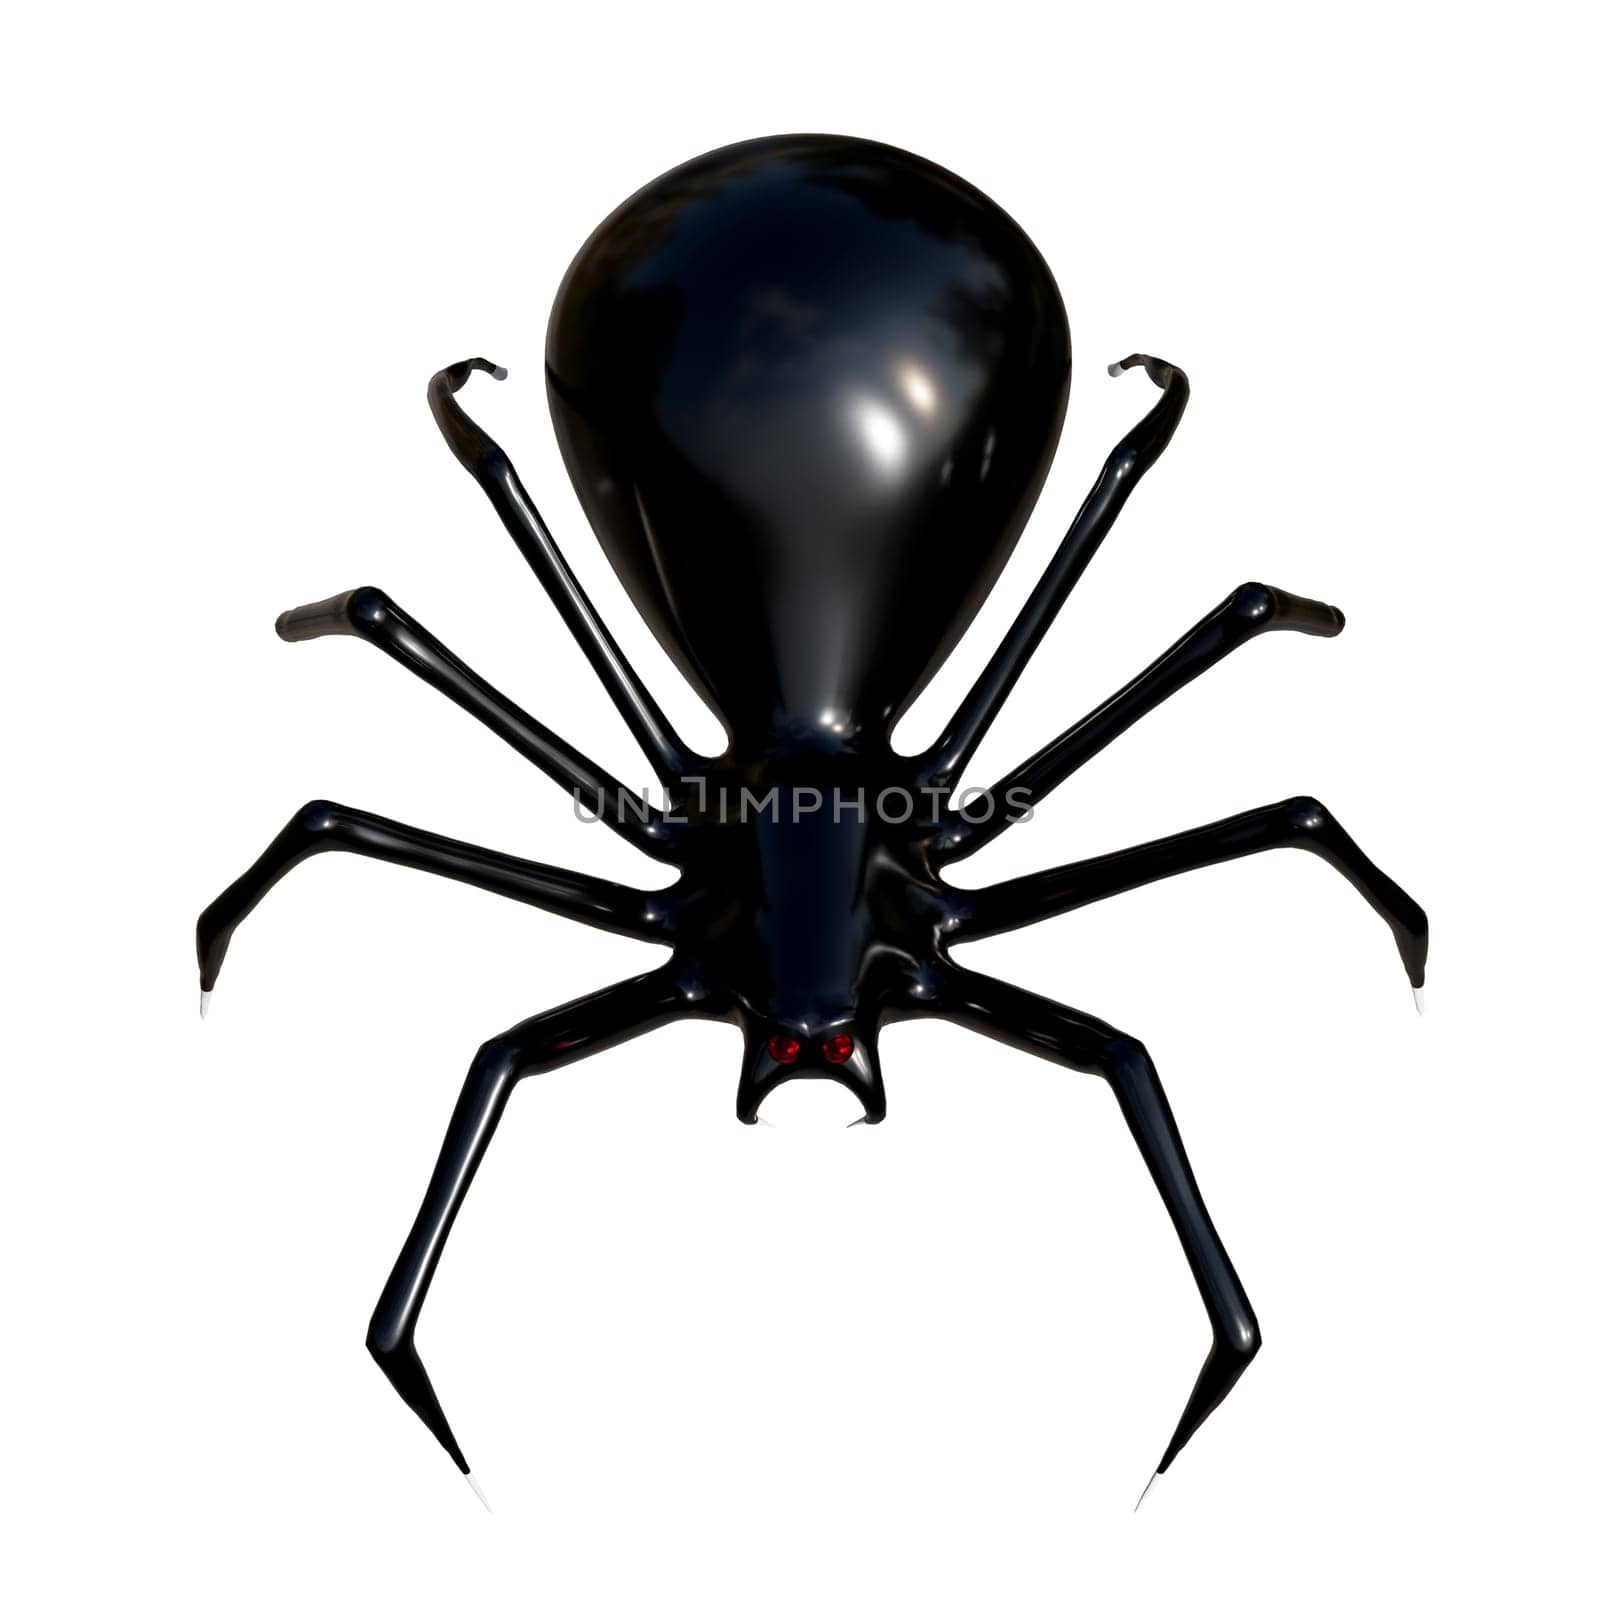 Realistic spider 3d rendering for Halloween decoration.